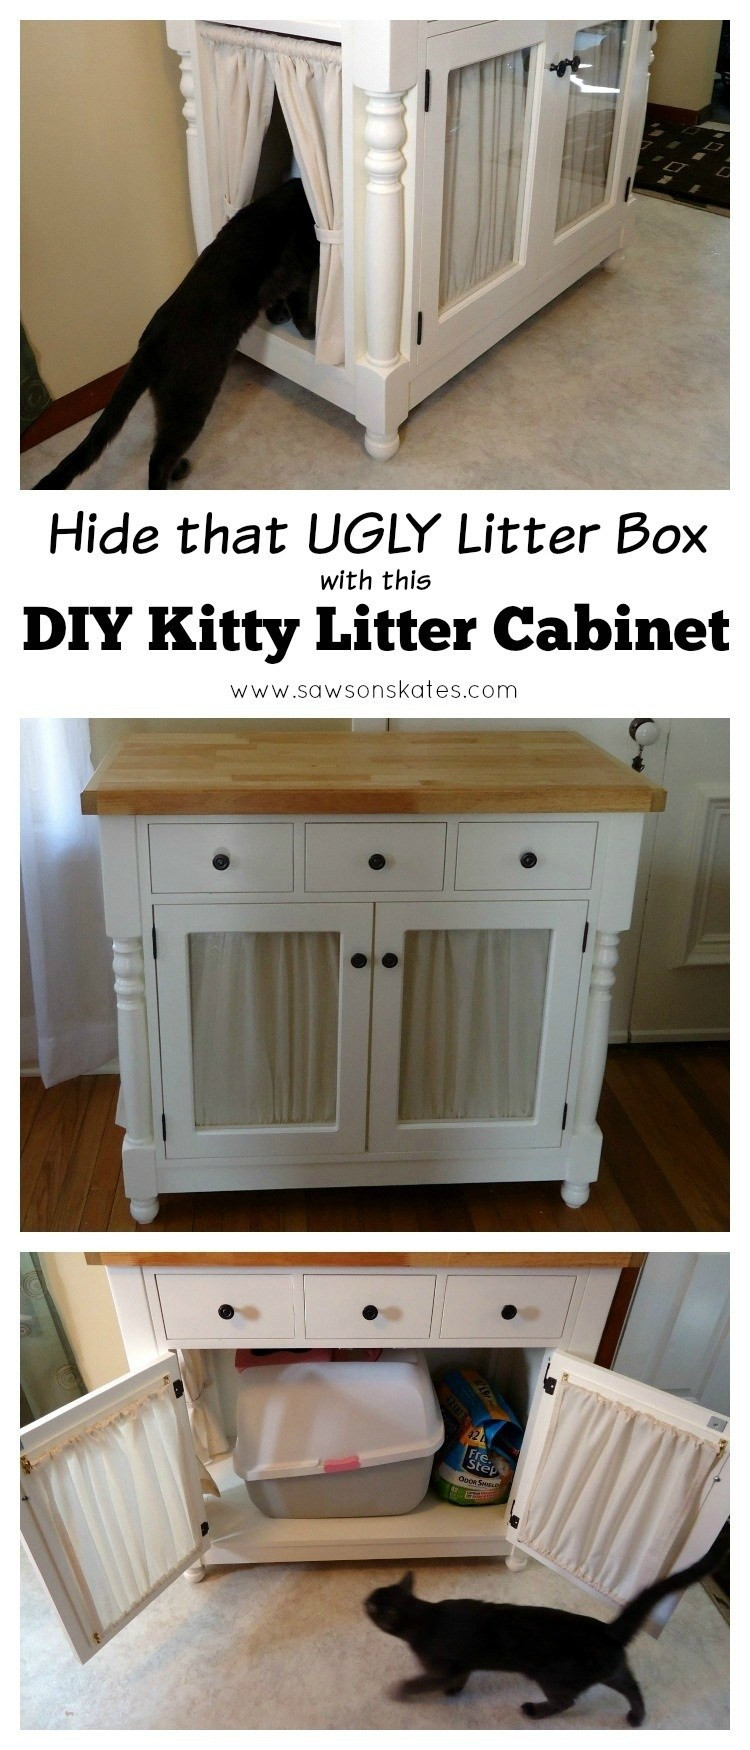 Best ideas about DIY Kitty Litter
. Save or Pin DIY Kitty Litter Cabinet Hides UGLY Litter Box Now.